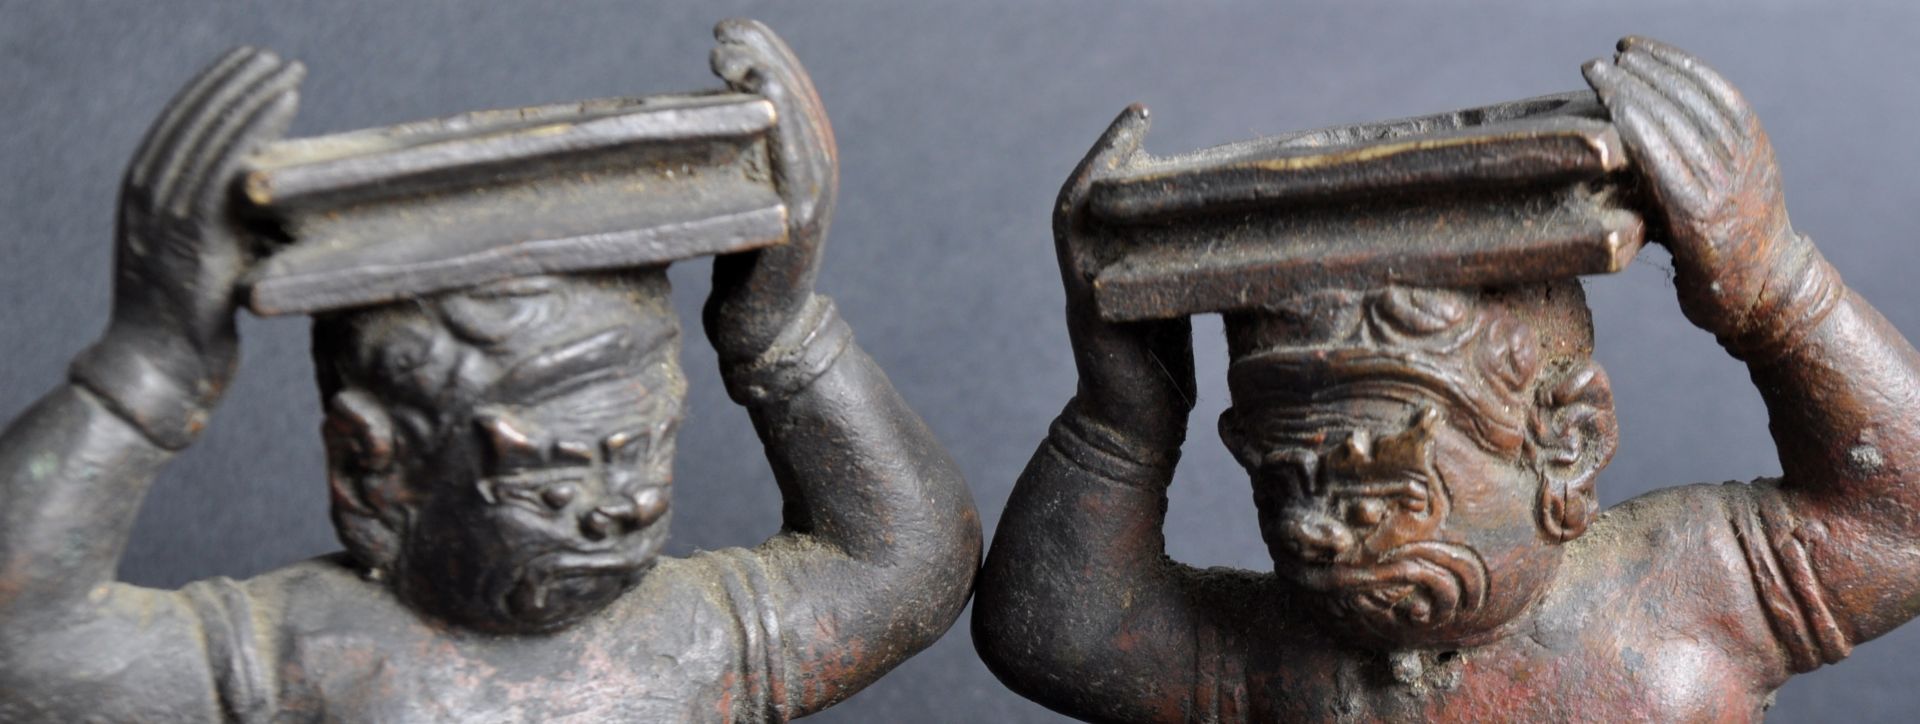 PAIR OF CHINESE BRONZE FIGURAL CANDLESTICKS - Image 3 of 6